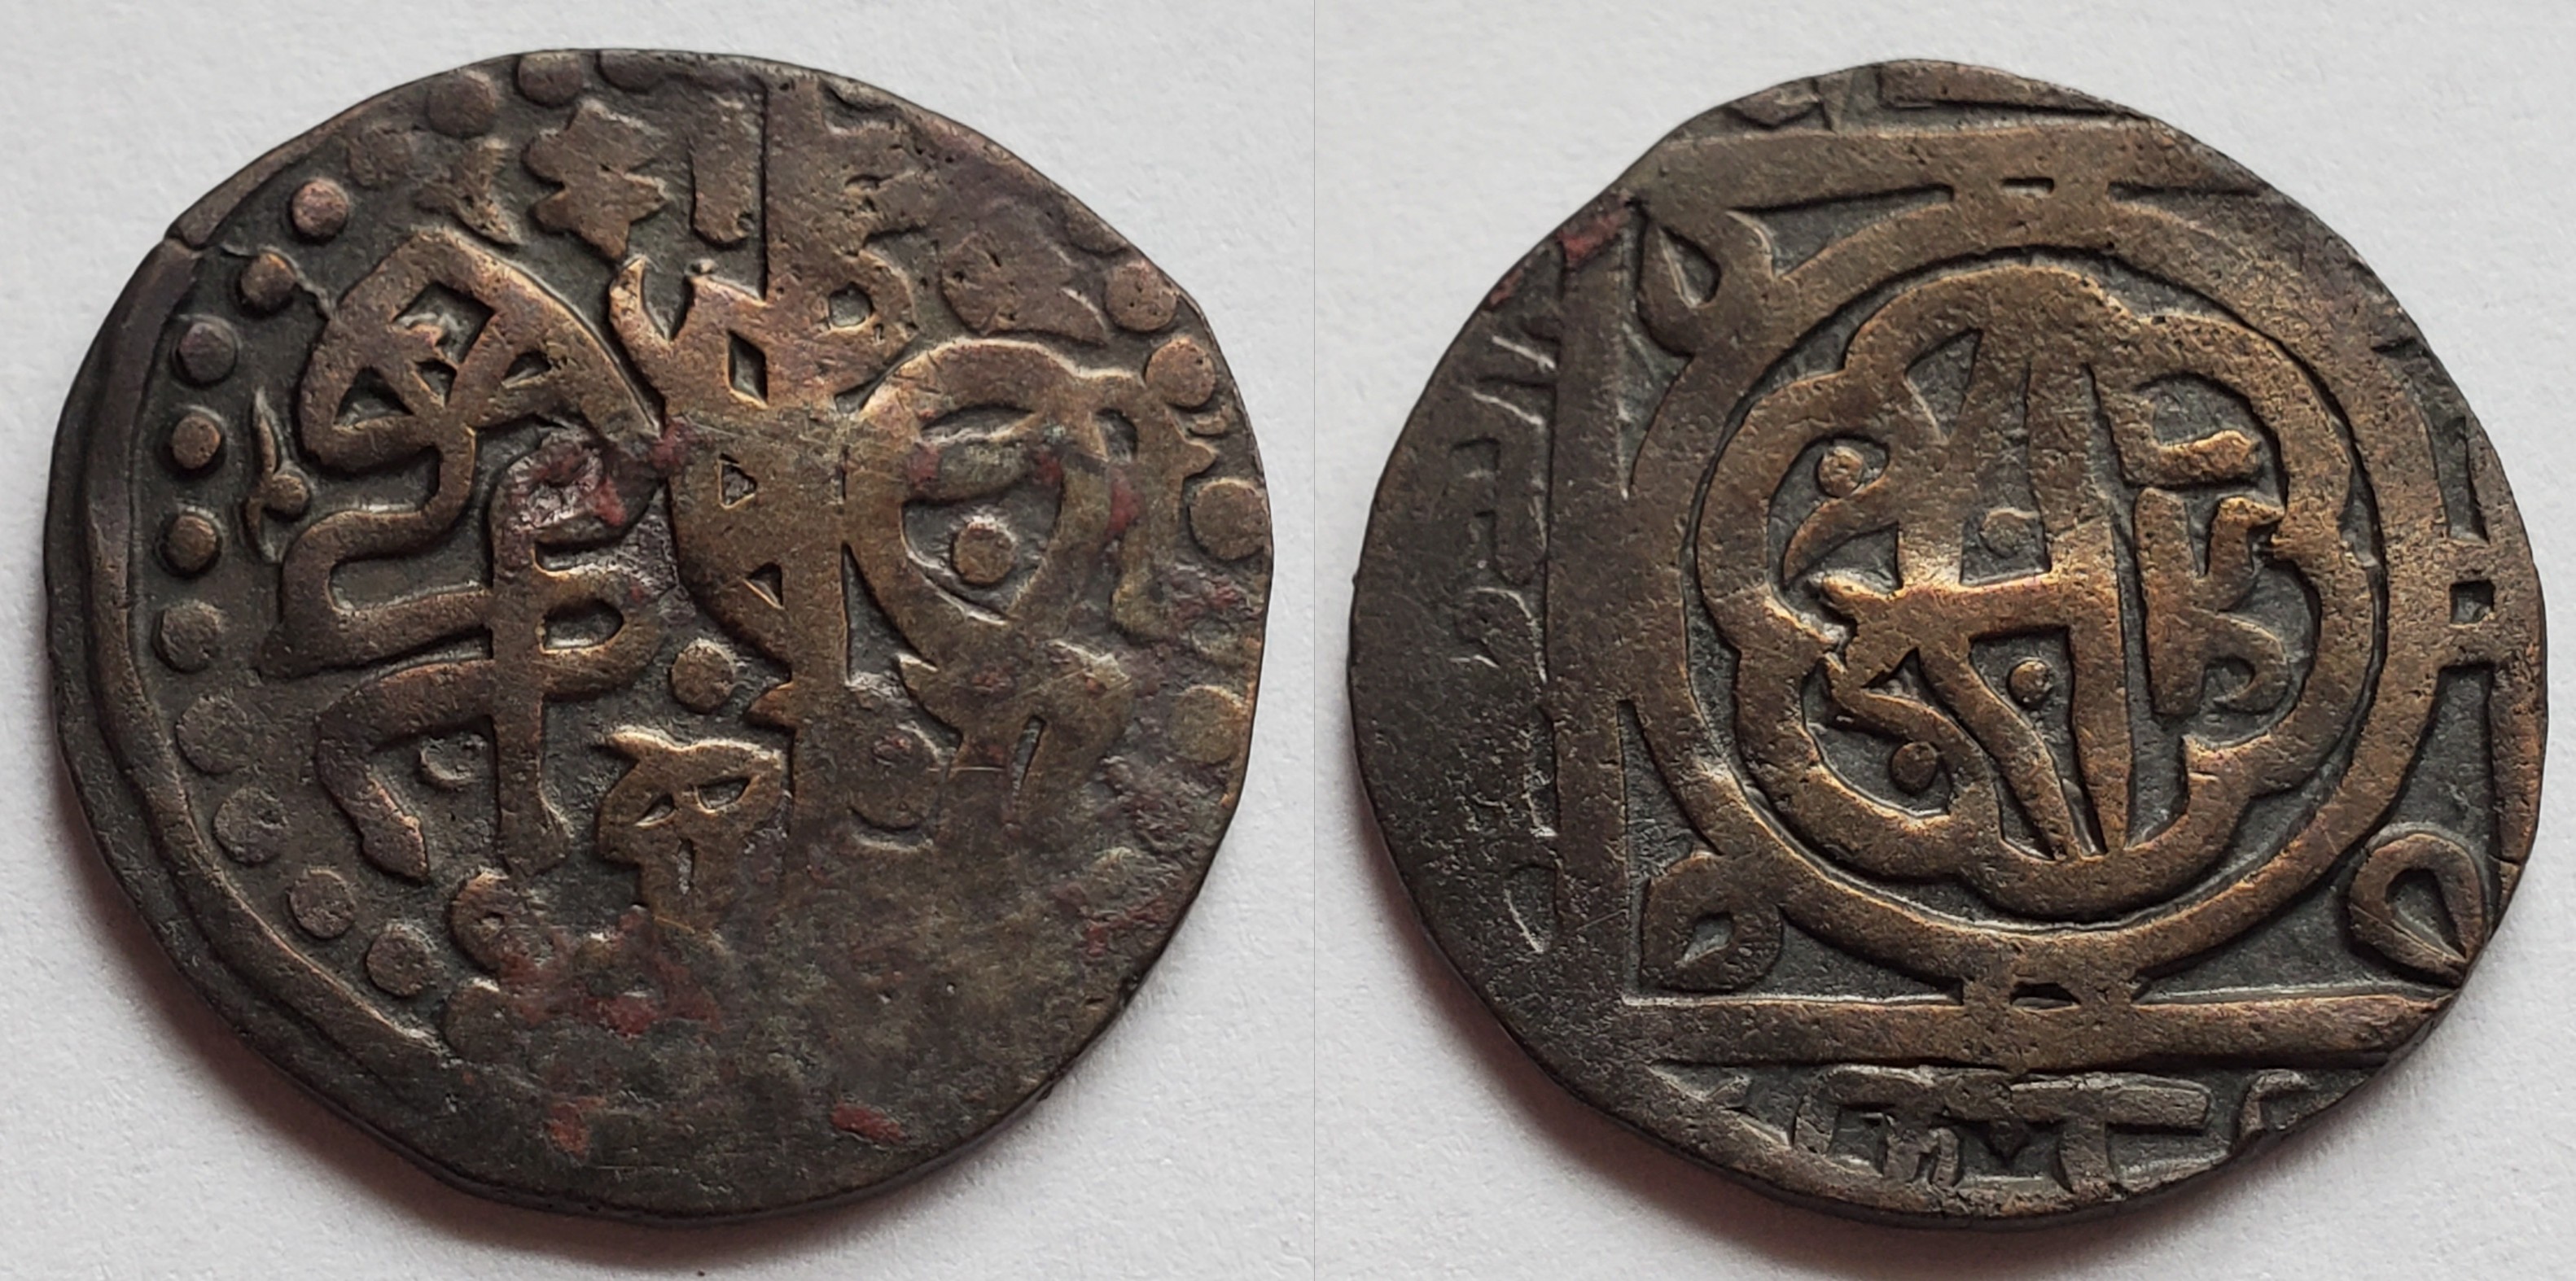 Billon jital of Genghis Khan, minted at Qunduz, Afghanistan, after 1221. Stylized horseman left, bow within ornate pattern.jpg